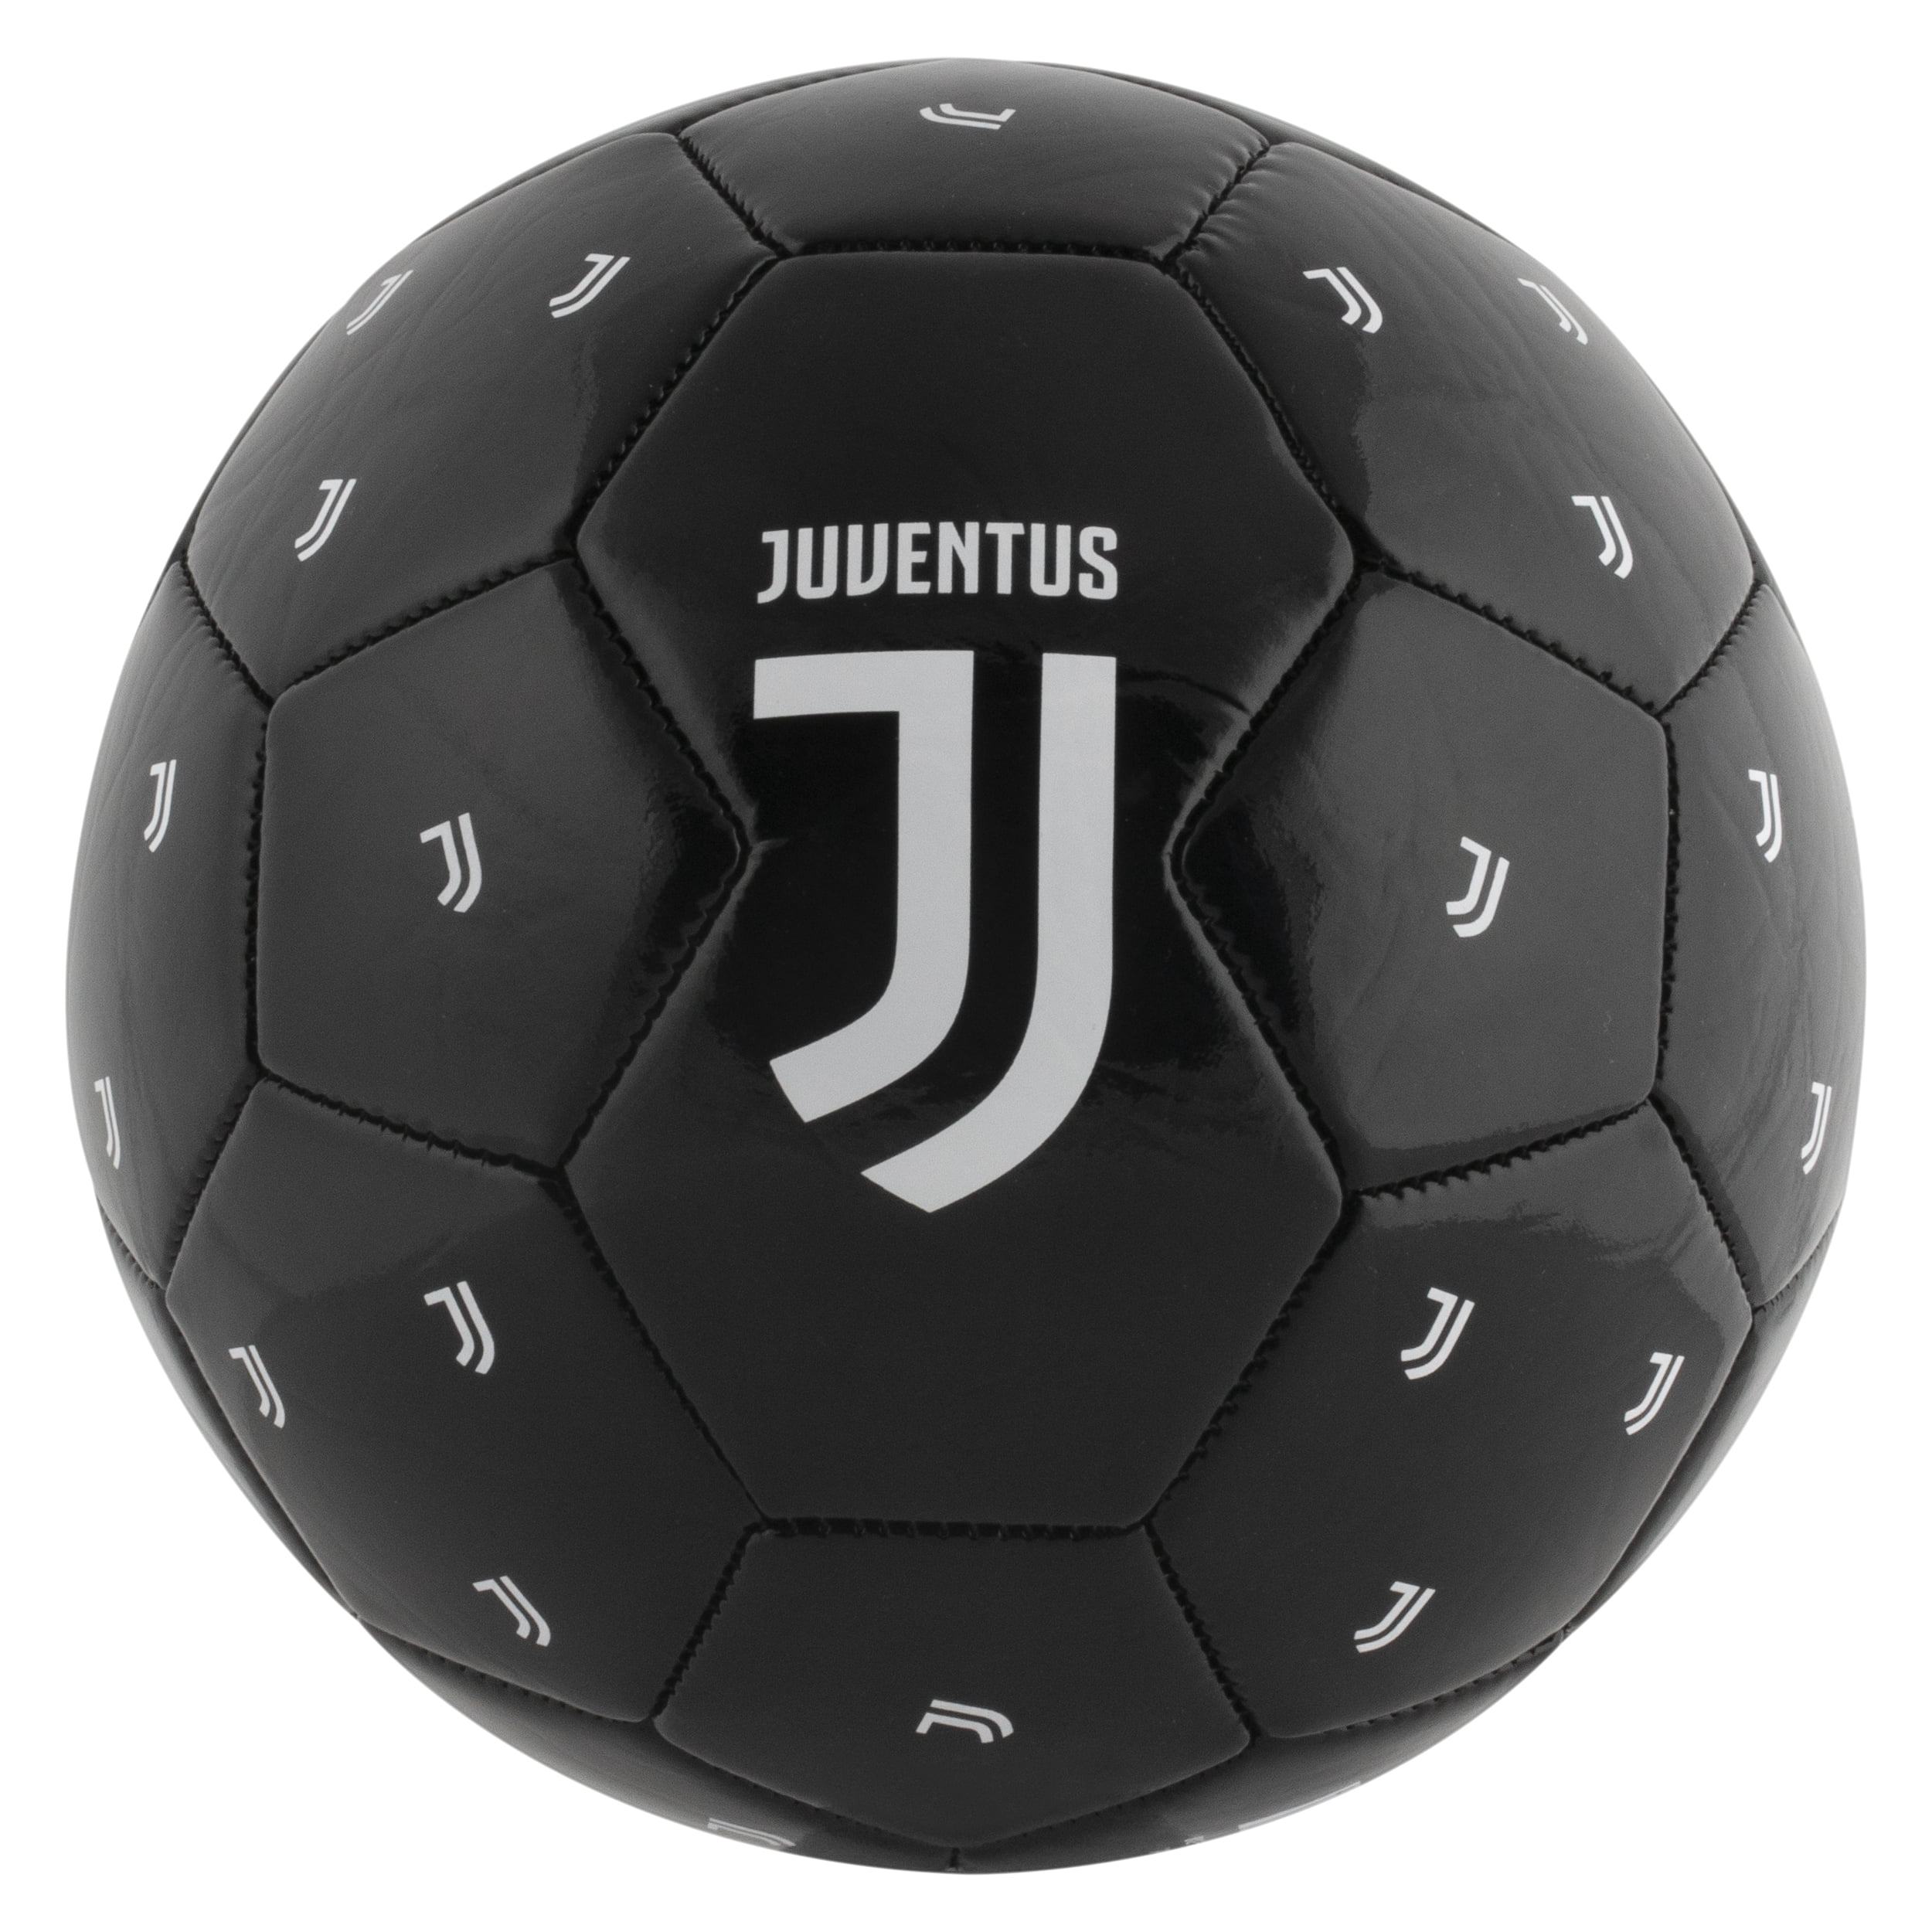 Details about   Soccer Ball Size 5 Adult Teens Match Training Football Balls Gift Equip Trainer 